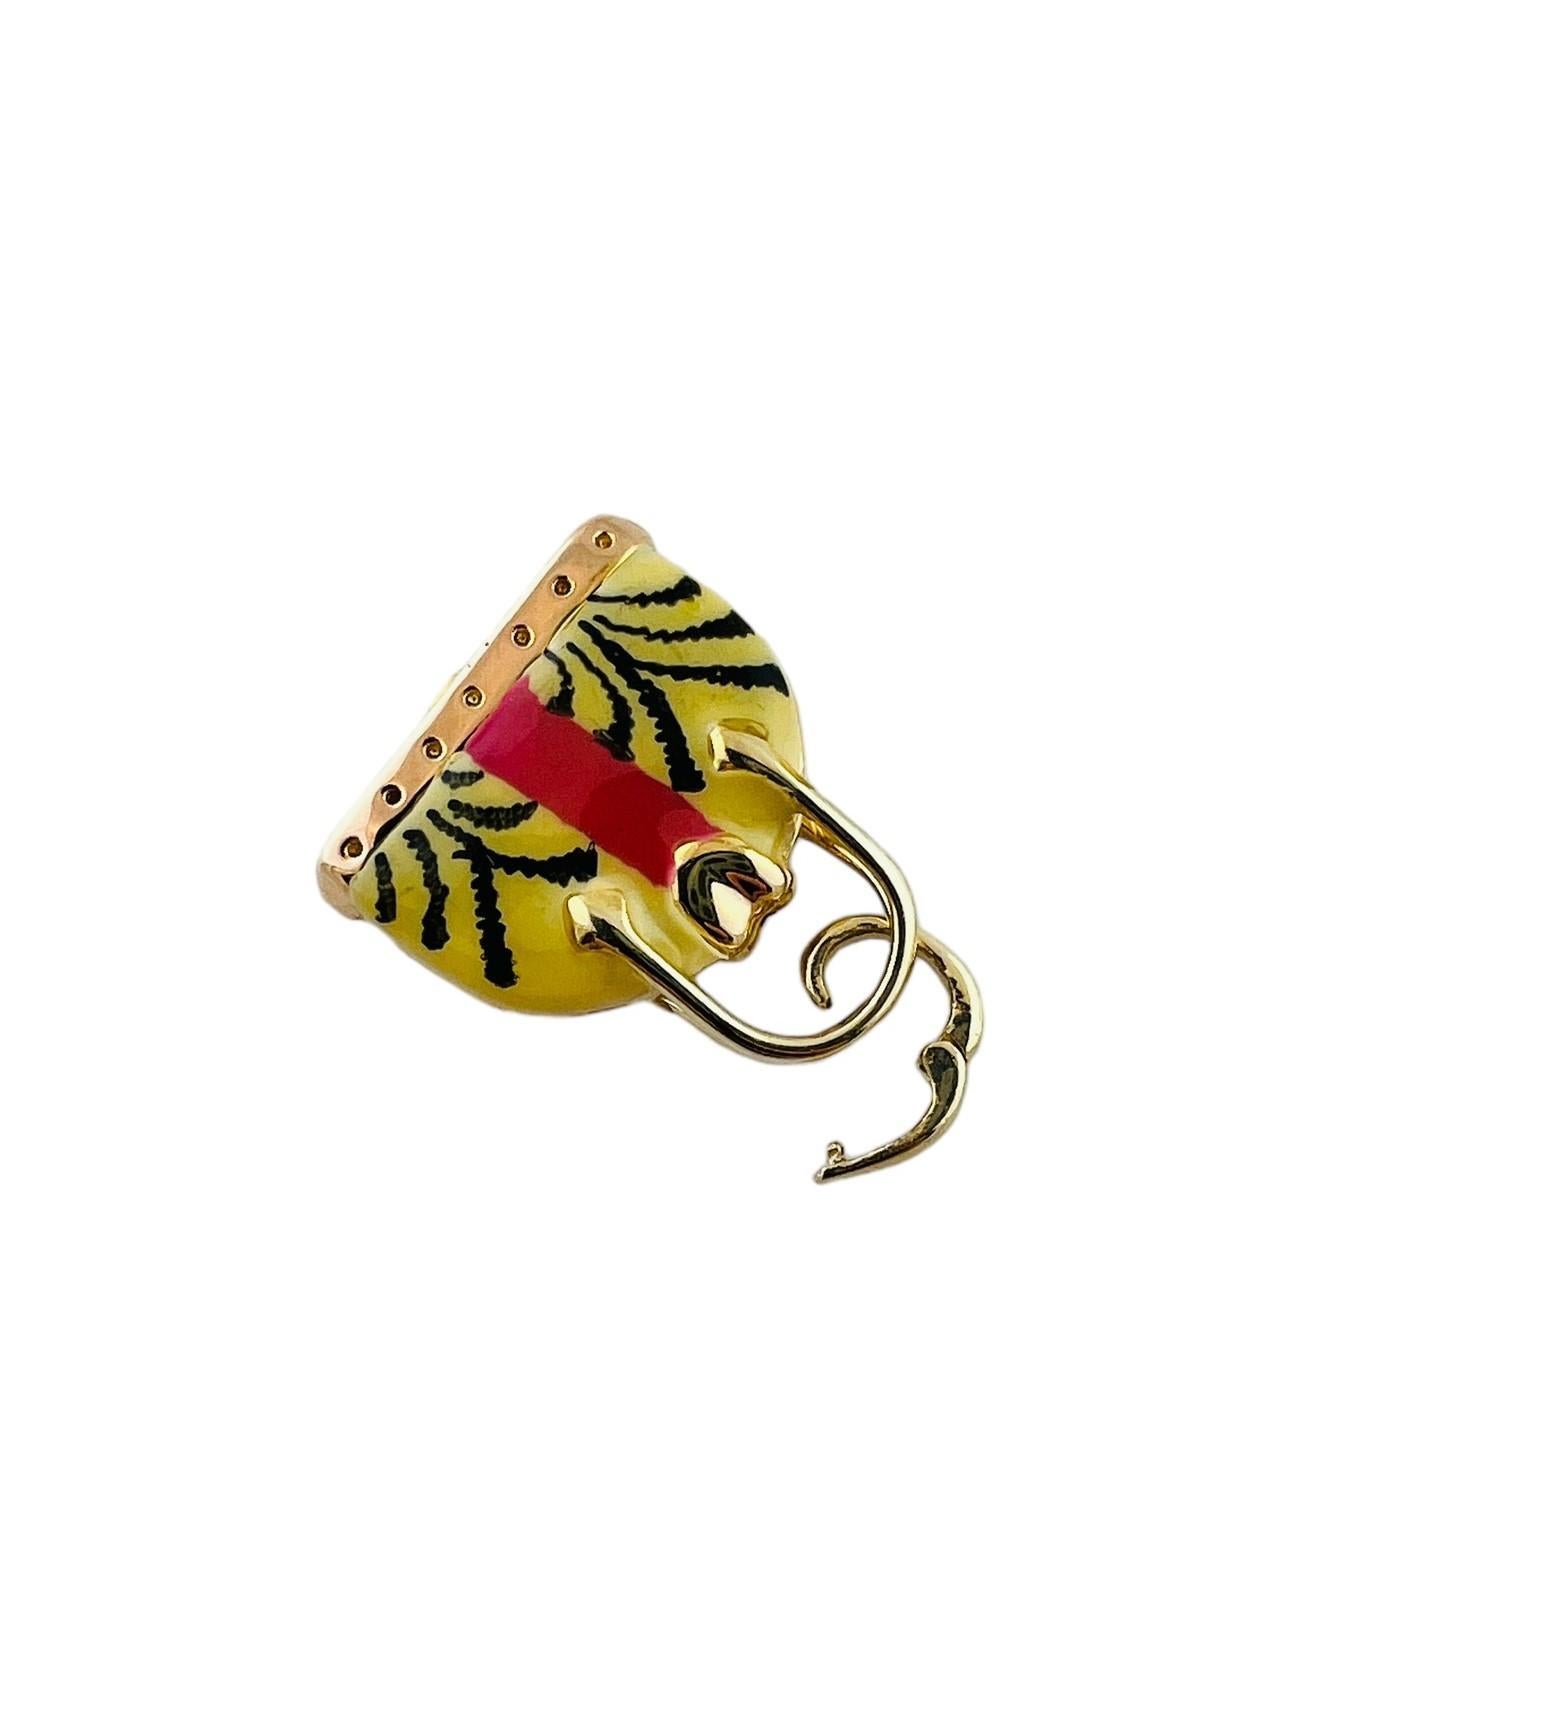 14K Yellow Gold Enamel Purse Charm 

This purse charm is set in 14K yellow gold and comes on an enhancer ring that opens for ease of putting on bracelet

Charm measures approx. 22.0 x 19.2 x 5.2 mm

2.8 grams / 1.8 dwt

Stamped 14K Italy

*Does not